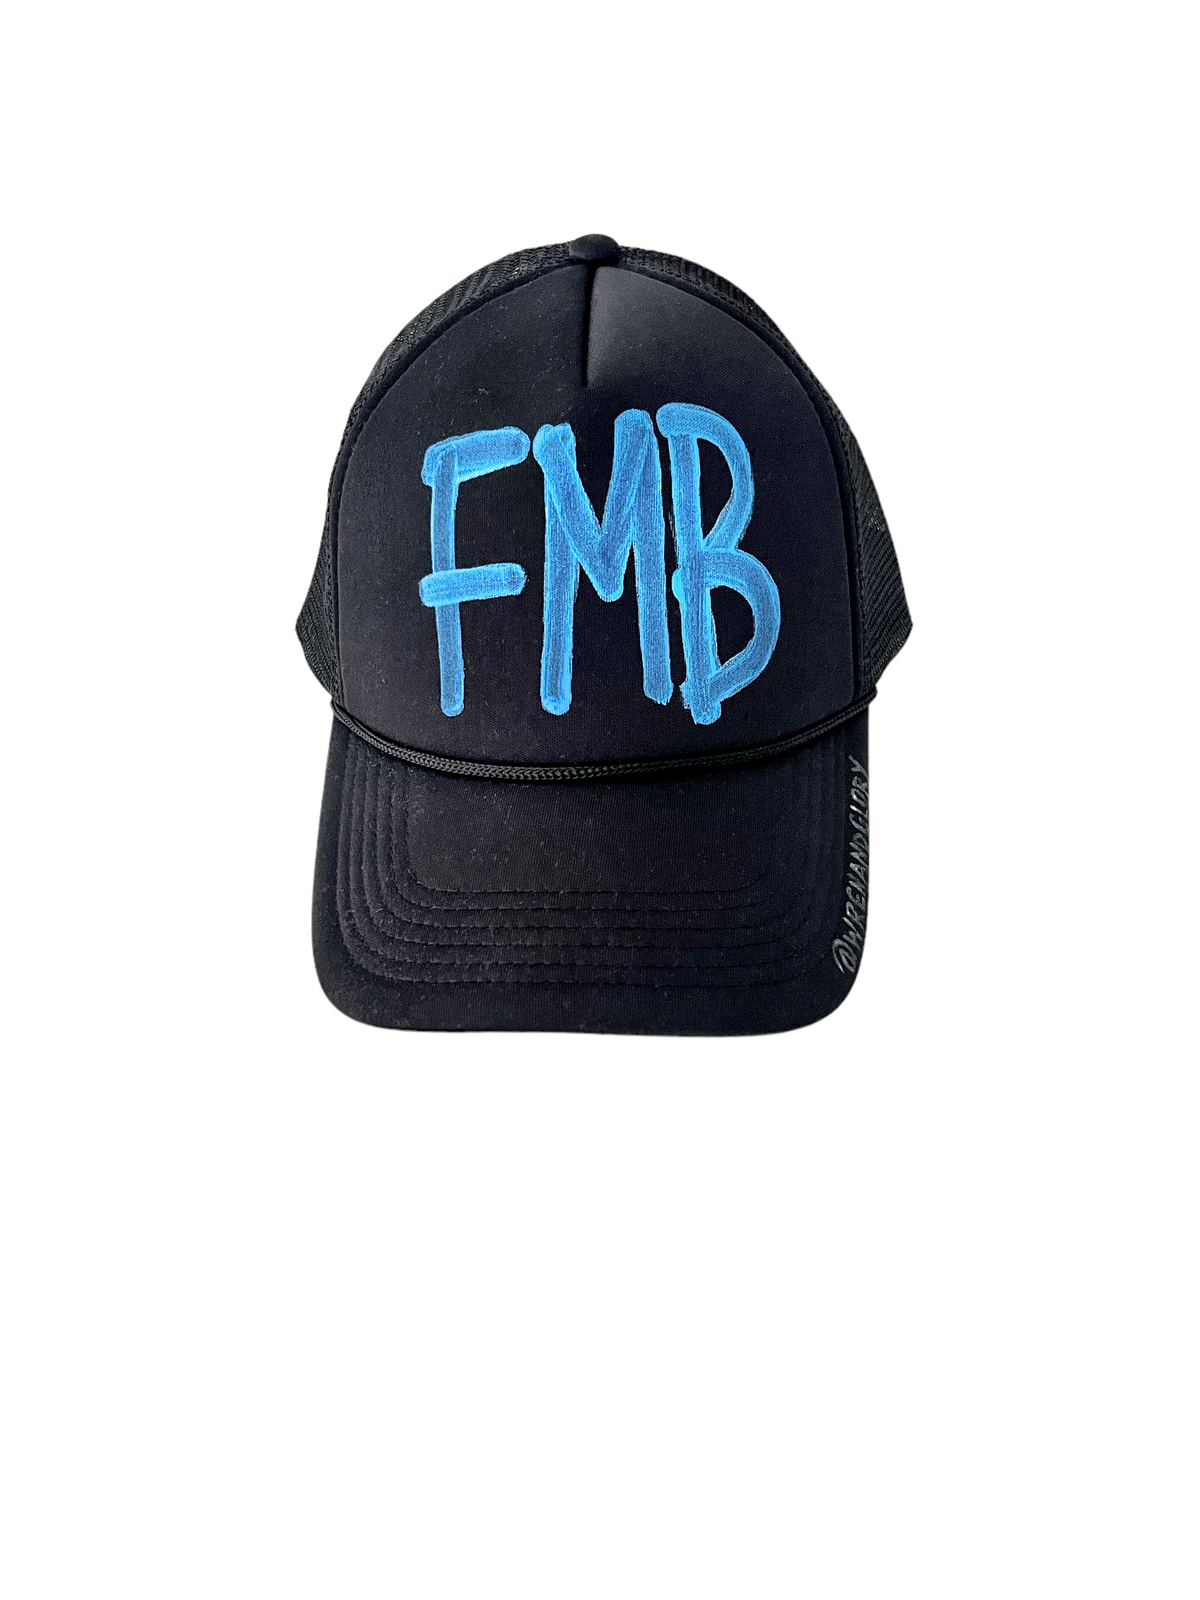 'Basic But Personalized' Trucker Hat